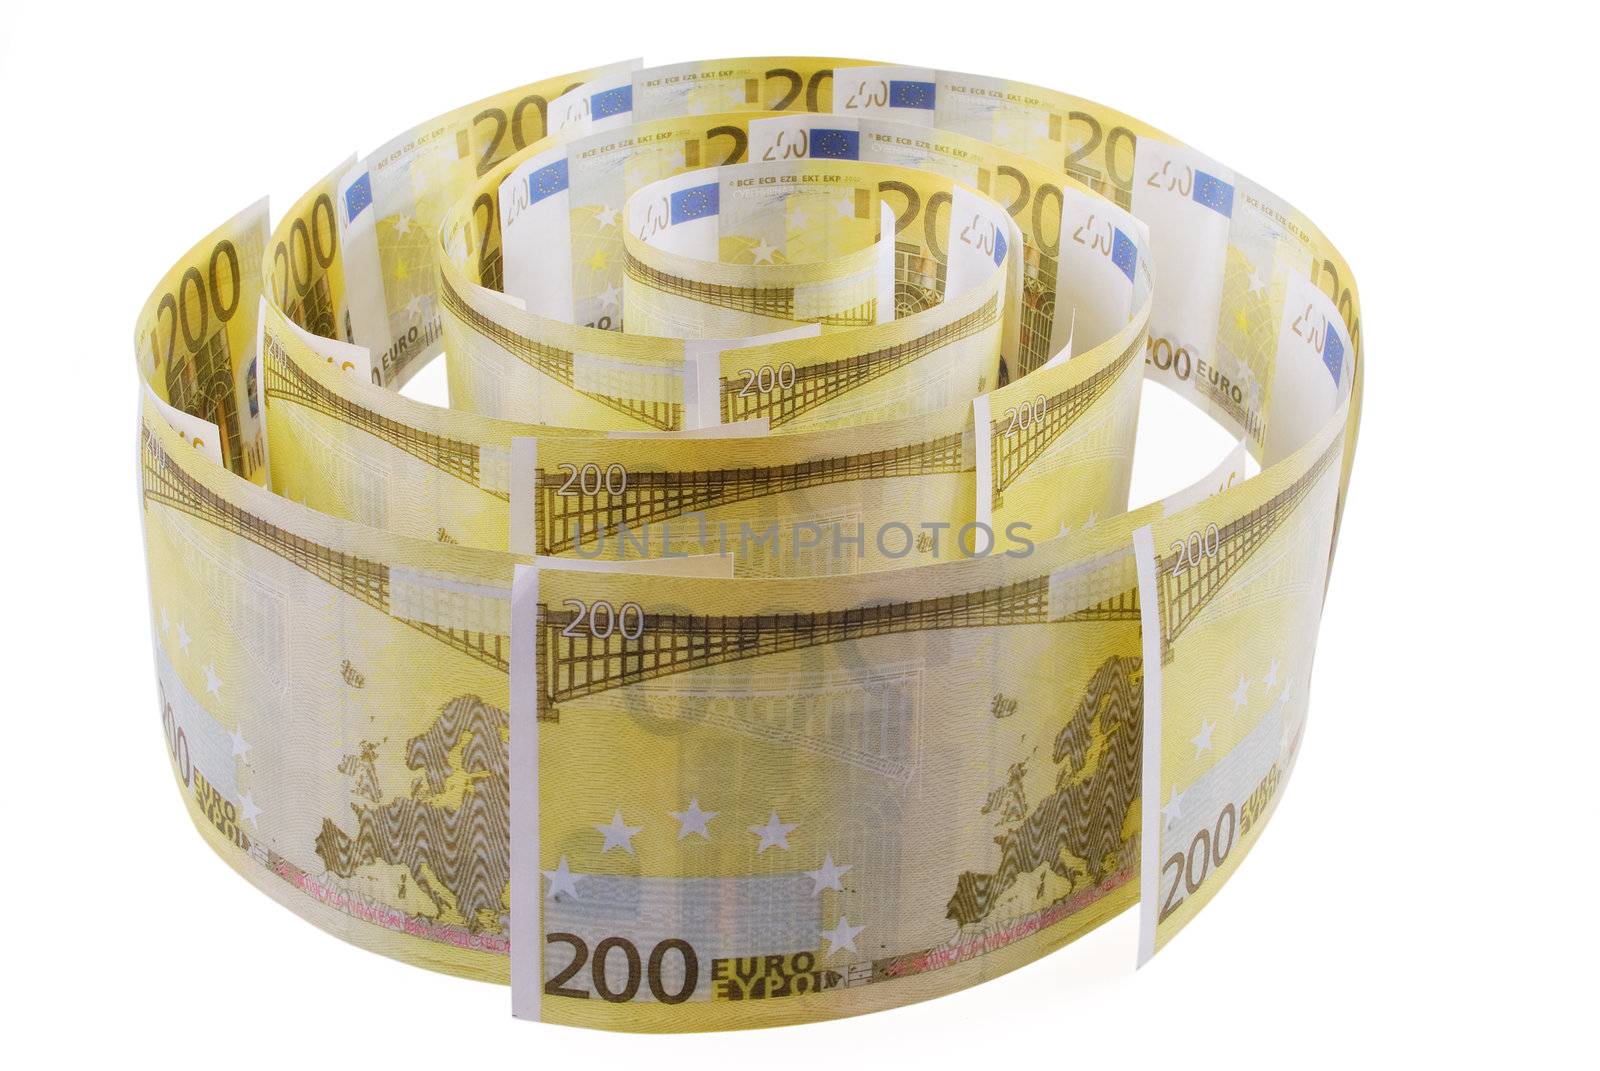 Spiral of 200 euro banknotes on the white background